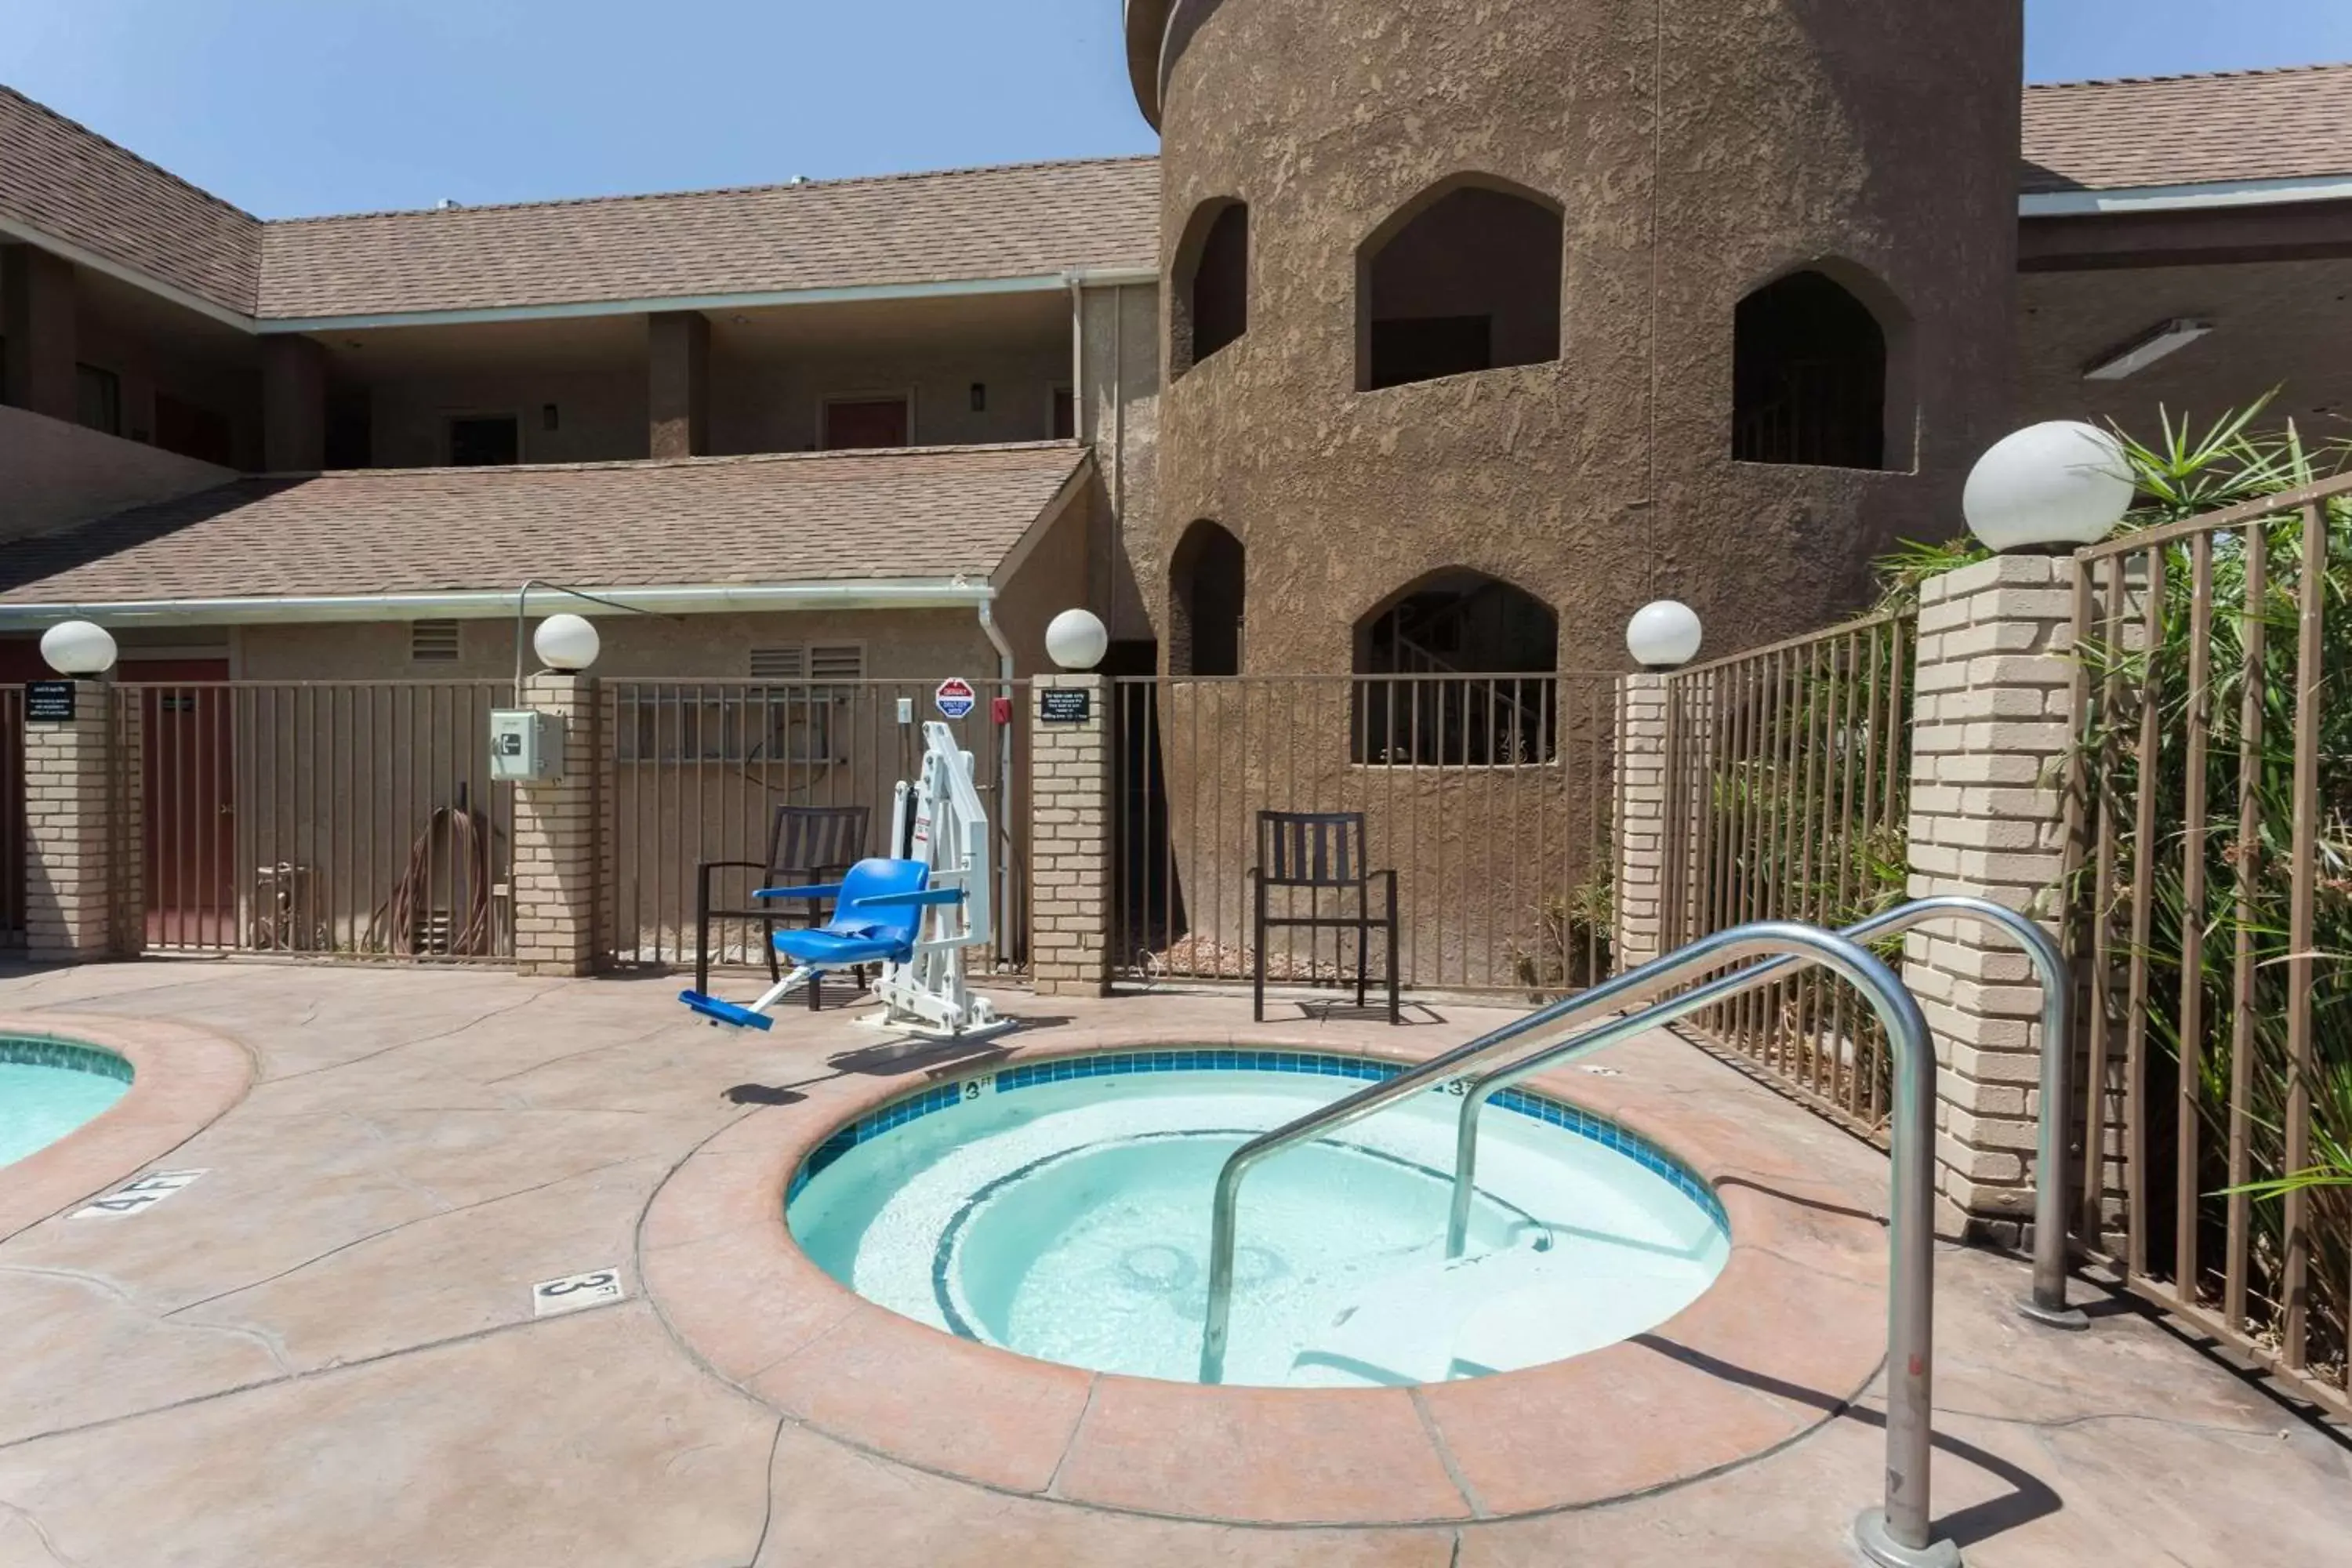 Hot Tub, Swimming Pool in Super 8 by Wyndham Bakersfield South CA